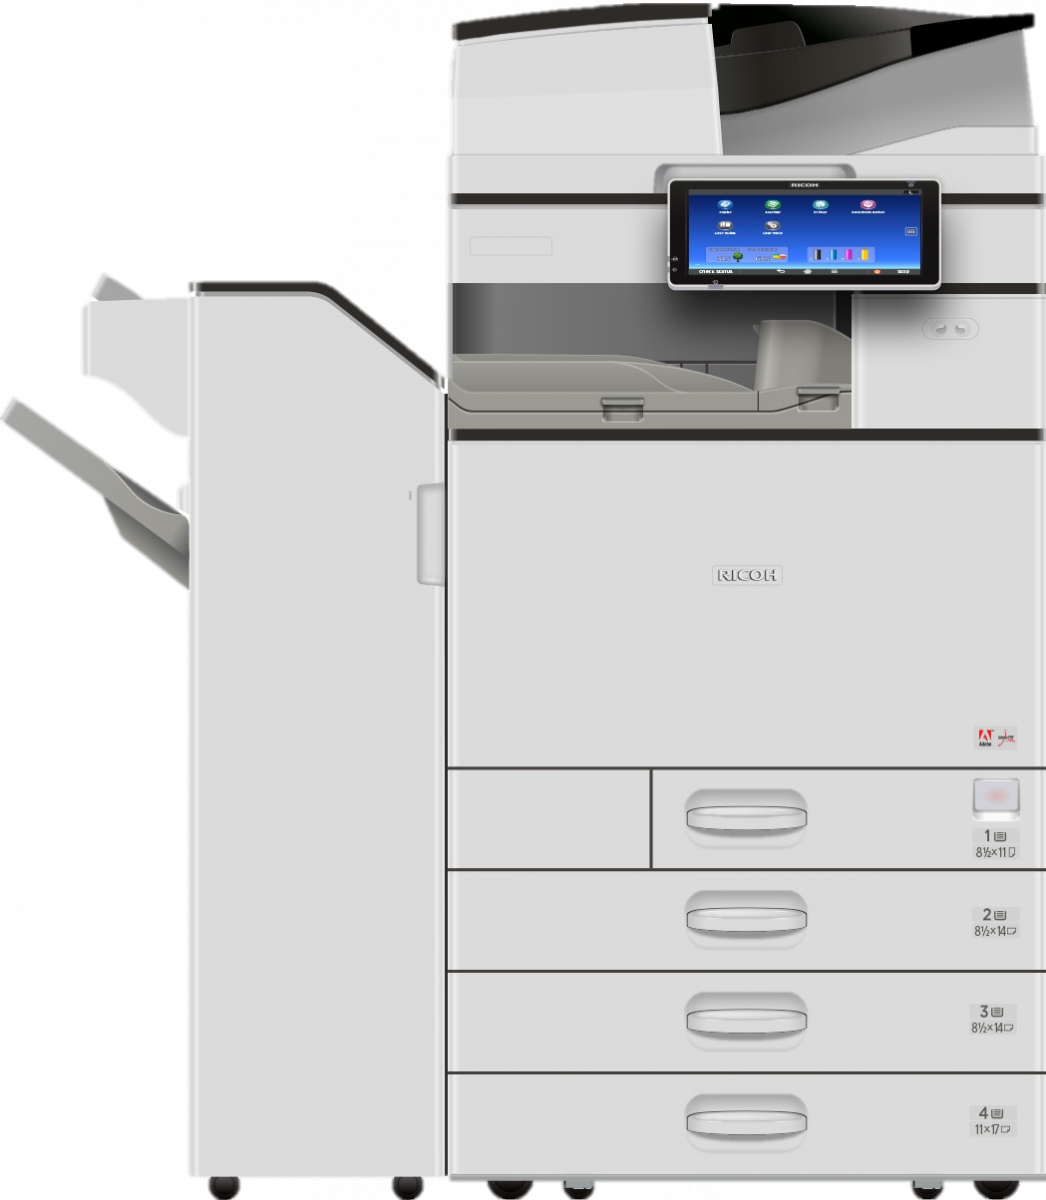 mfp, copier, printer, fax, workgroup multifunction, Ricoh, Doing Better Business